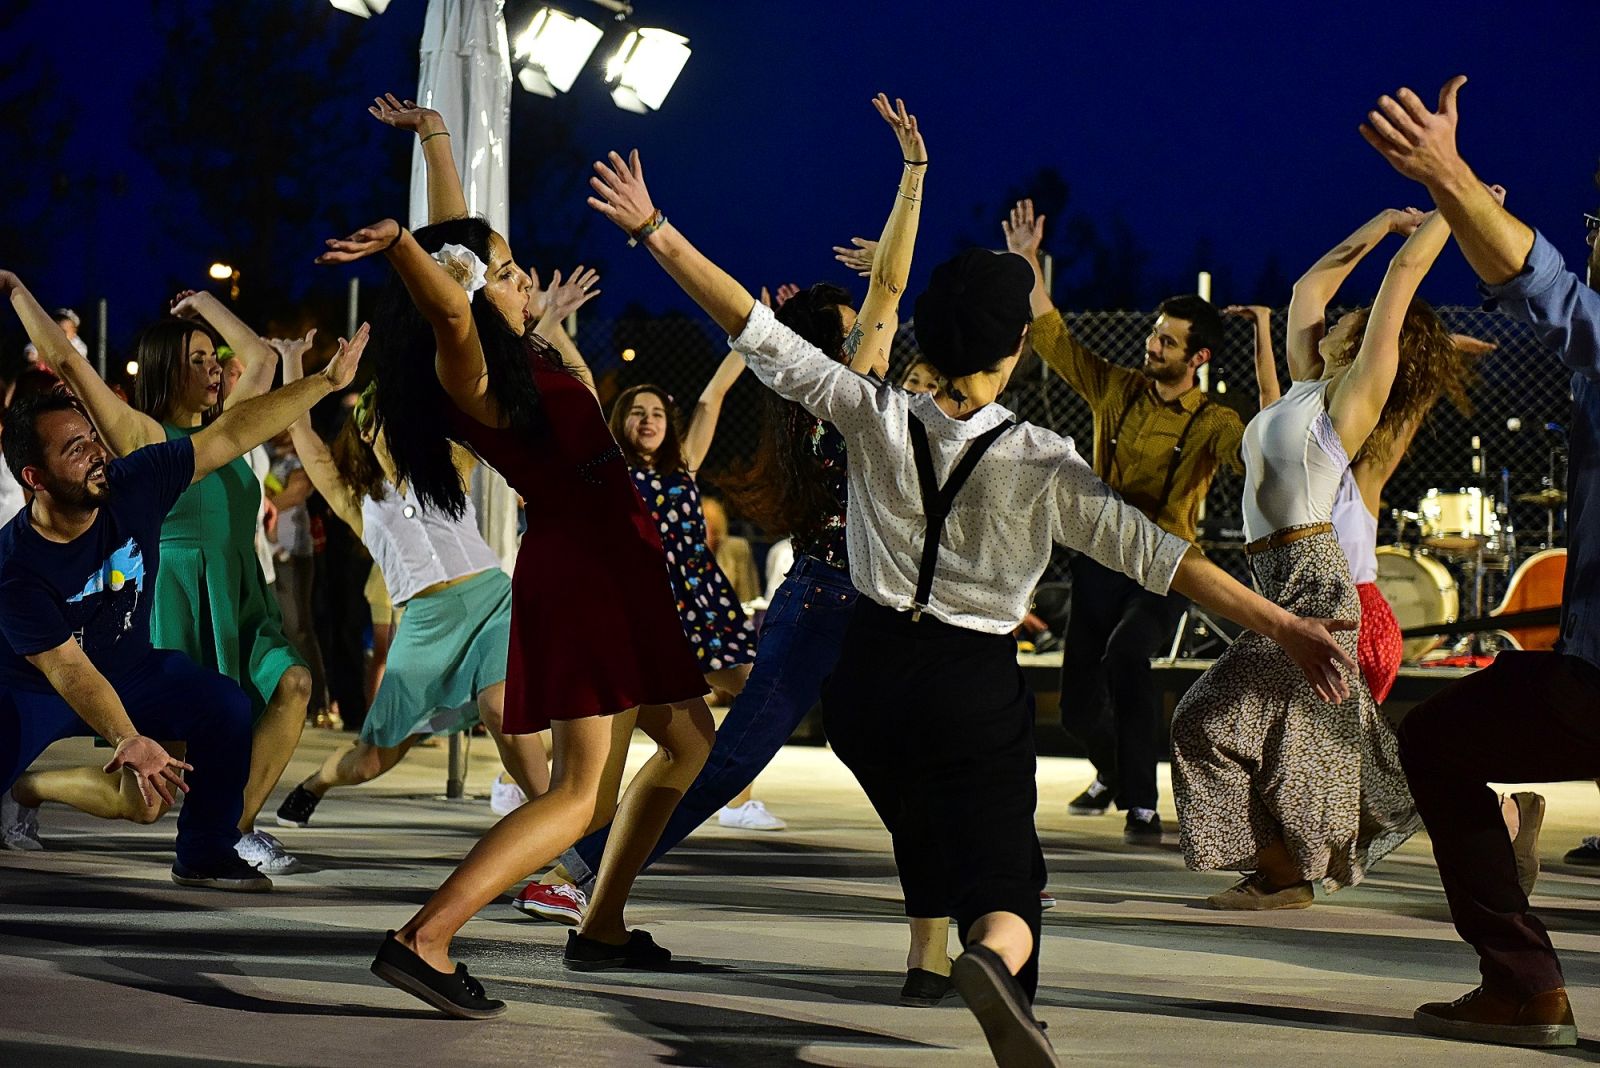 Photo of a group of people dancing swing